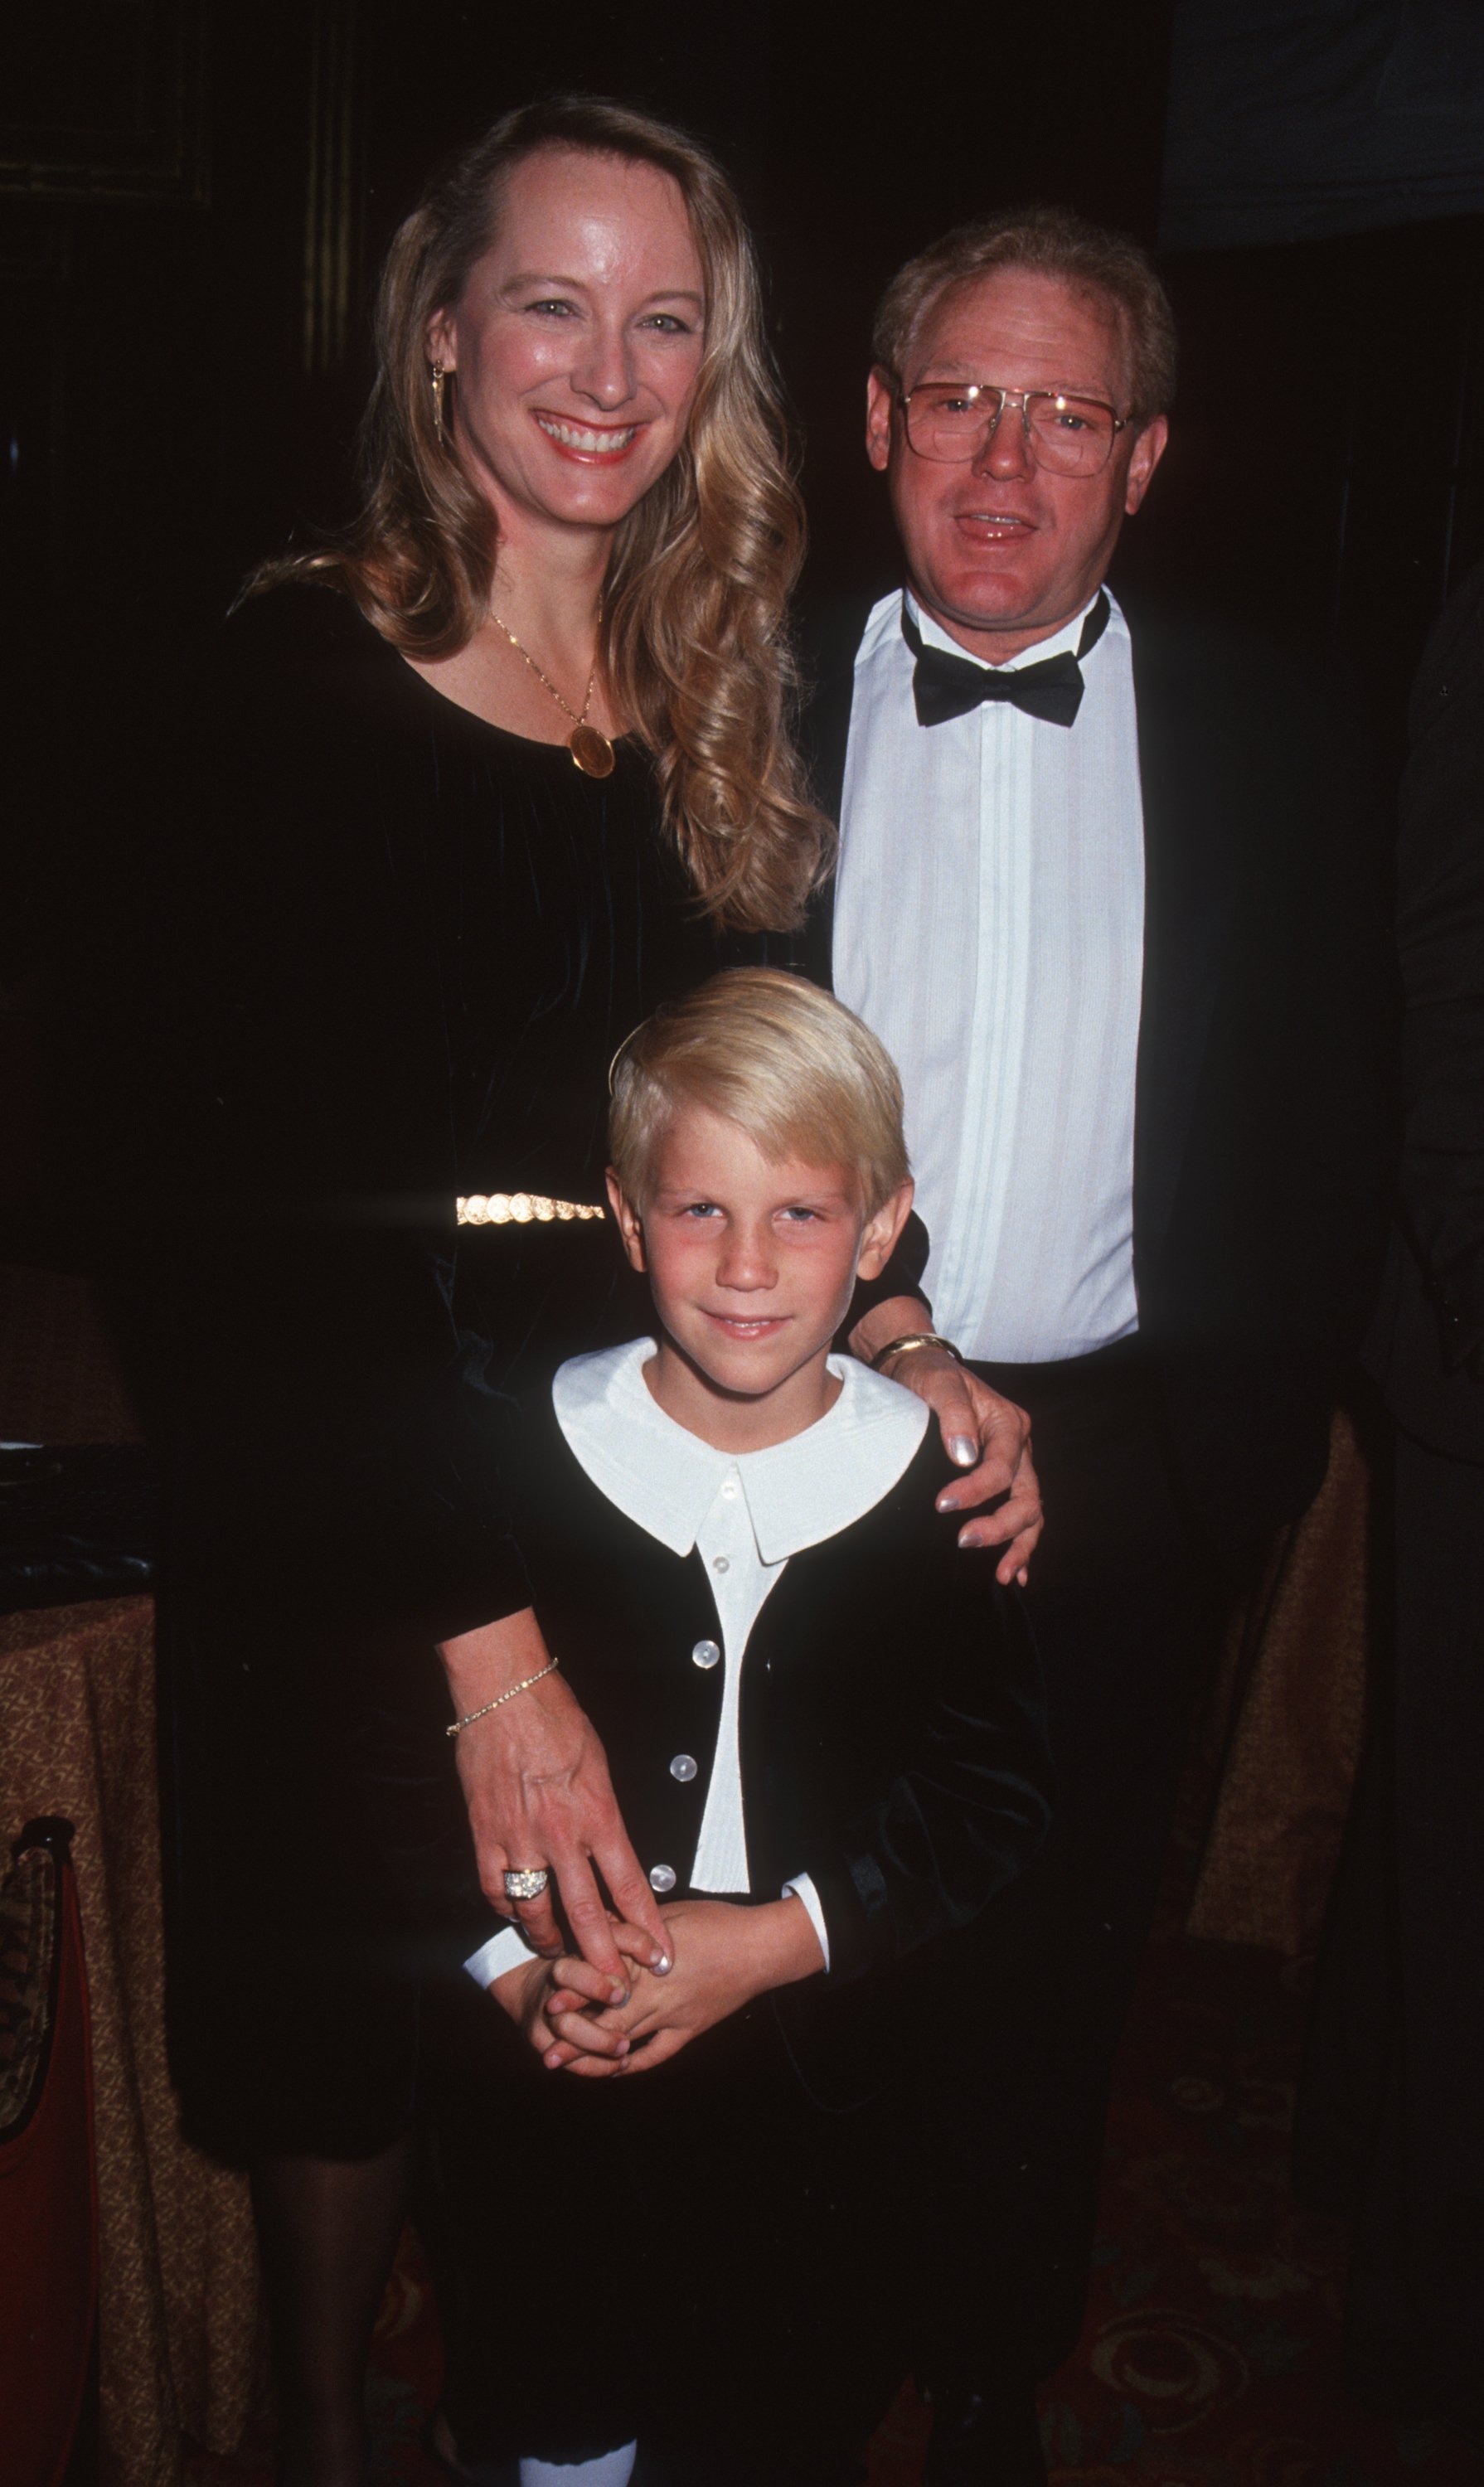 James MacArthur, wife Helen Beth Duntz, and son Jamie MacArthur at the Victoria's Magazine A Star in Our Crown Gala on May 18, 1992, in New York | Photo: Getty Images